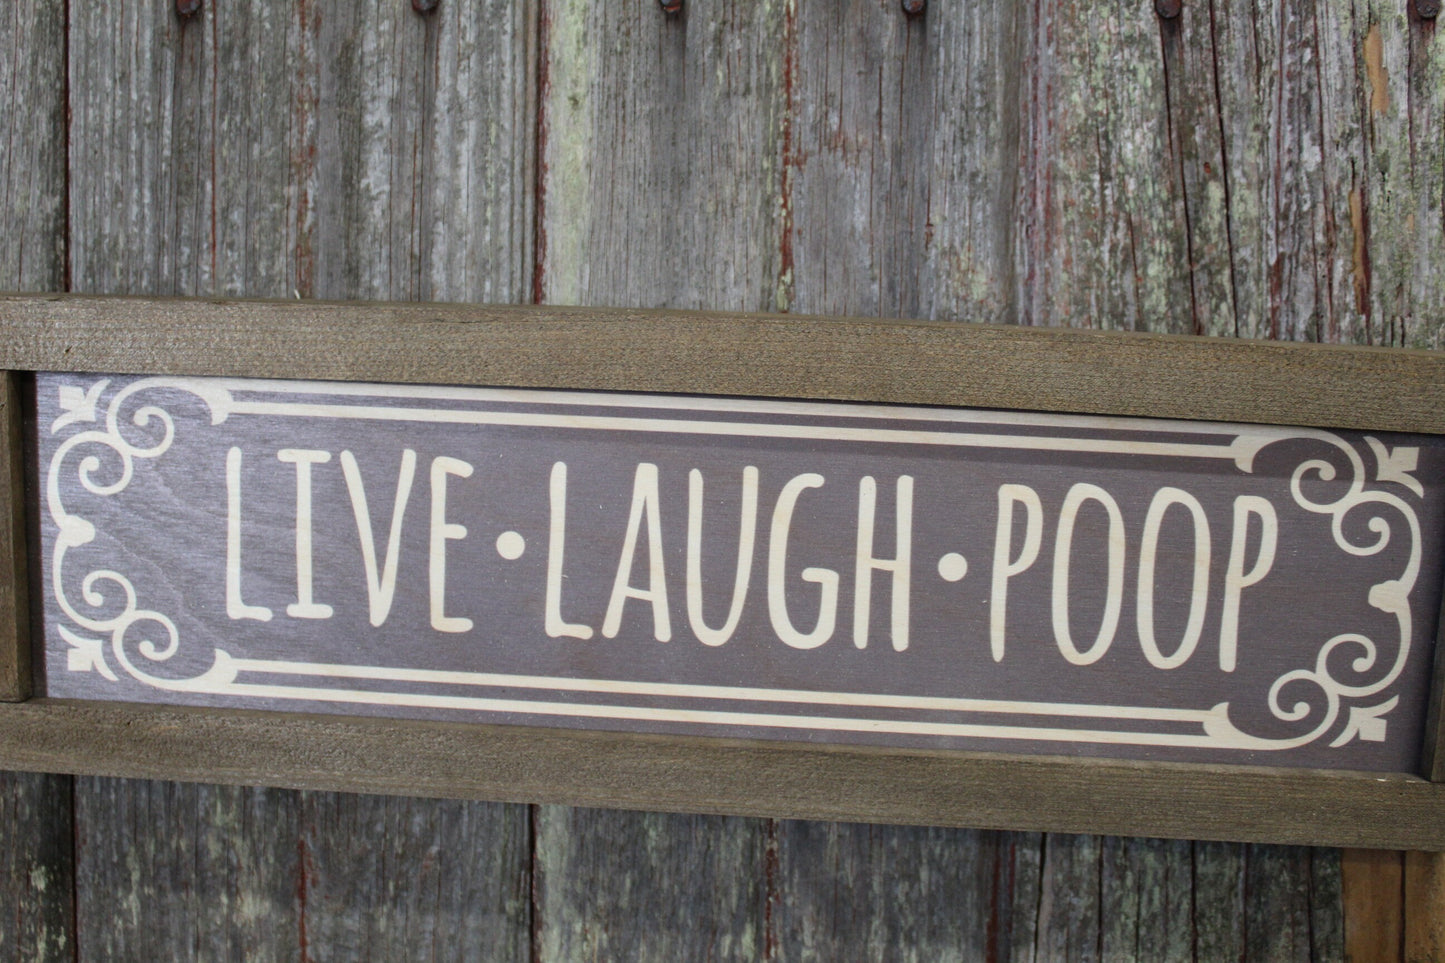 Live Laugh Poop Bathroom Sign Wood Printed Rustic Primitive Wall Art Picture Text Script Retro Bath Funny Silly Small Gray Brown Print